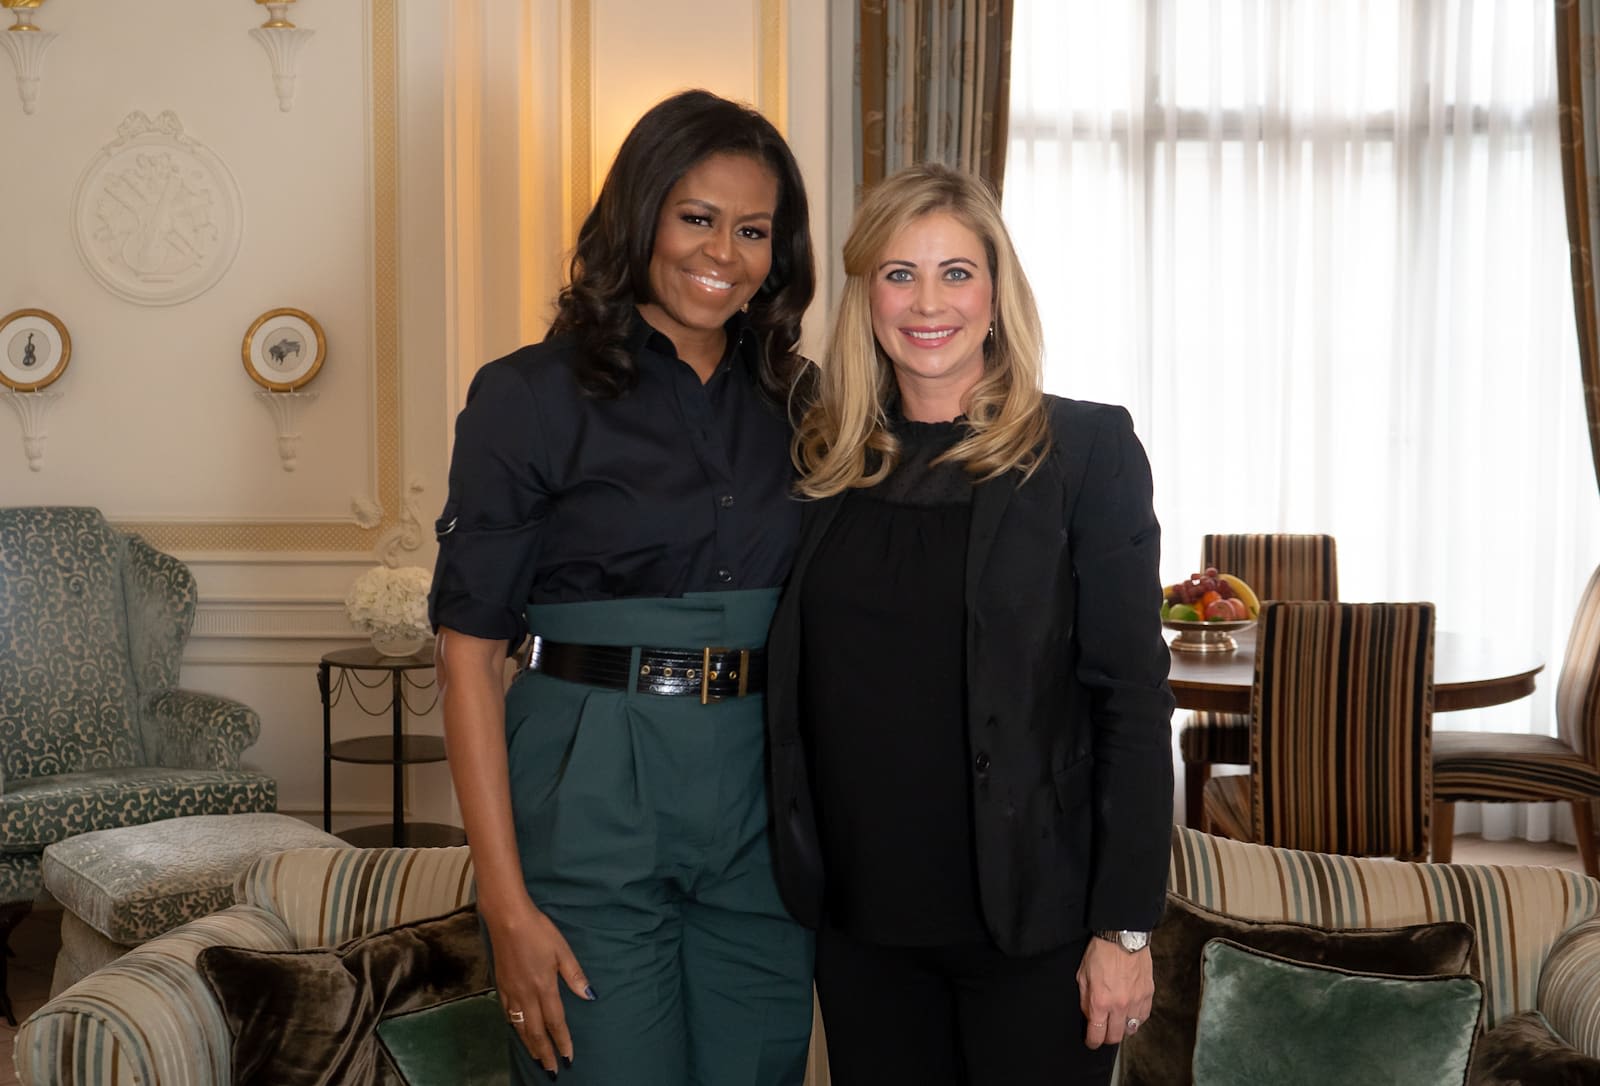 Michelle Obama and Holly Branson, standing together, both women are smiling